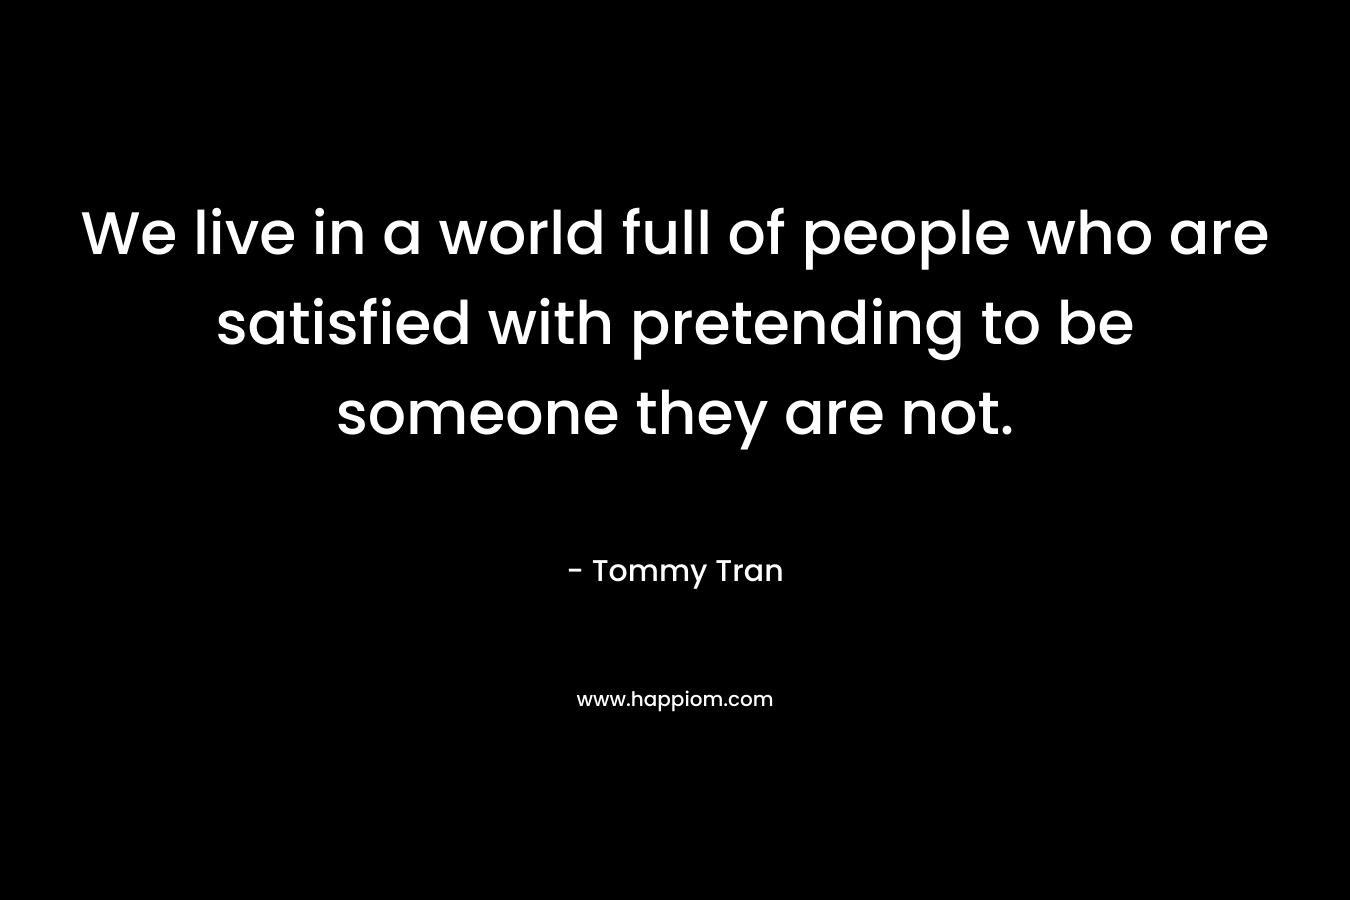 We live in a world full of people who are satisfied with pretending to be someone they are not.